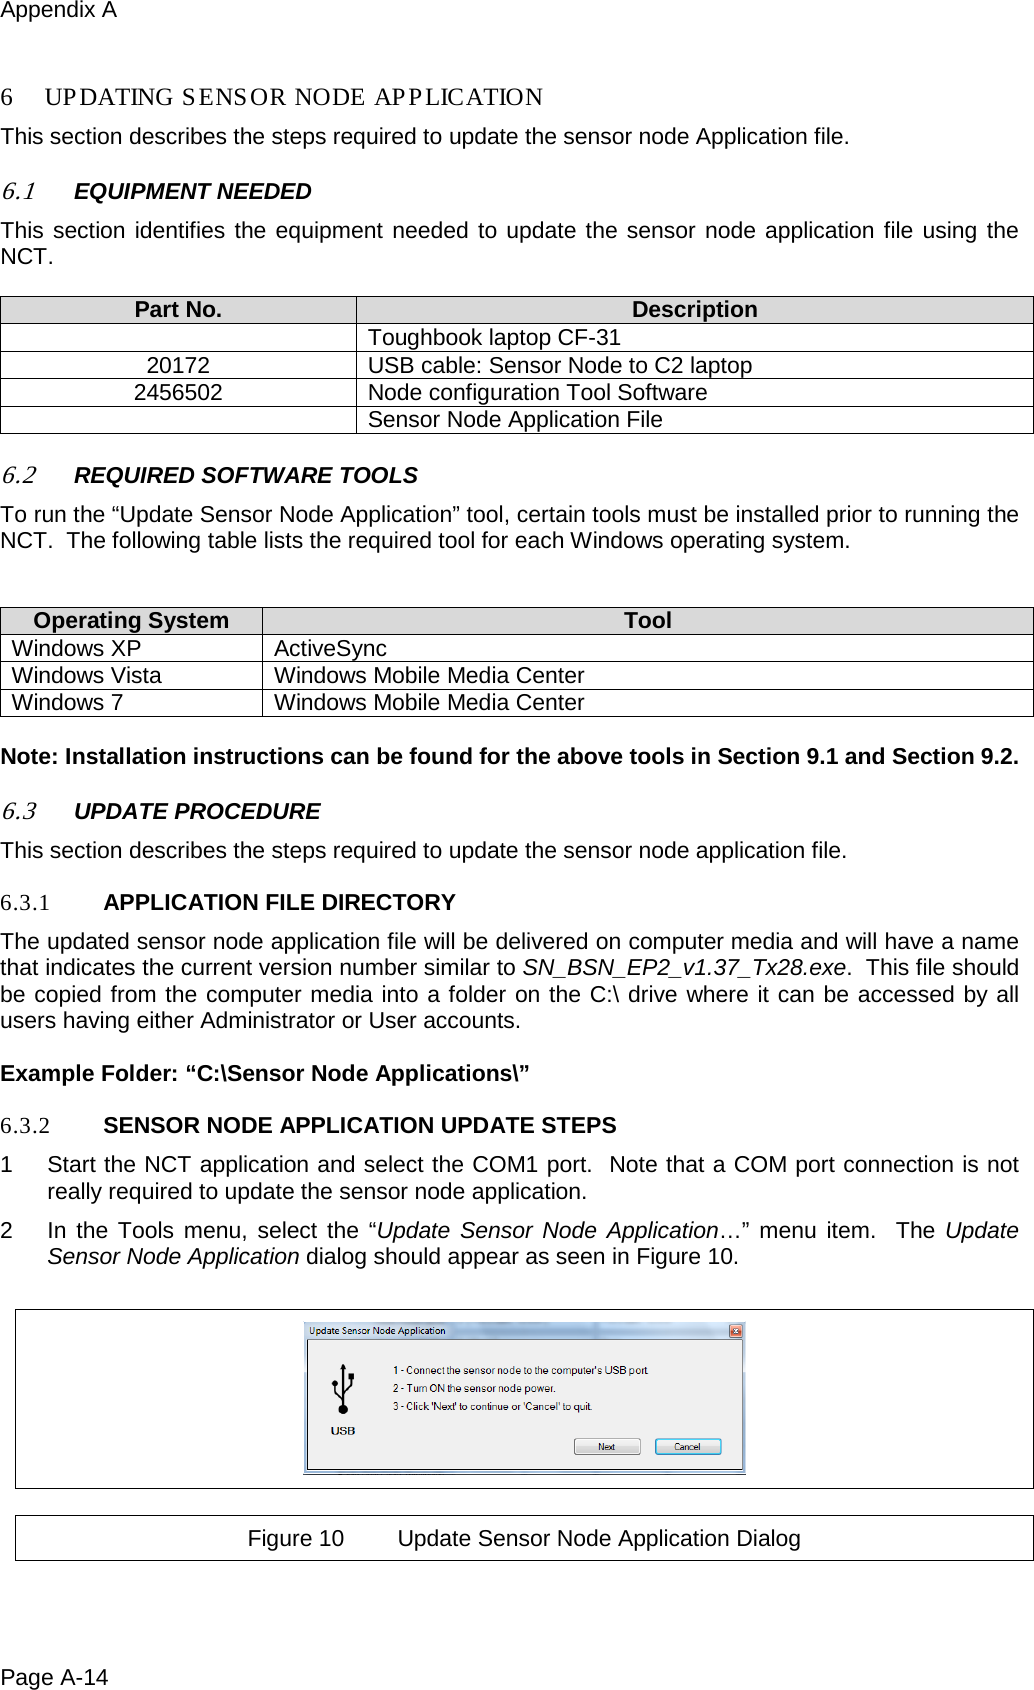 Appendix A Page A-14  6 UPDATING SENSOR NODE AP P LICATION This section describes the steps required to update the sensor node Application file.  6.1 EQUIPMENT NEEDED This section identifies the equipment needed to update the sensor node application file using the NCT.  Part No. Description  Toughbook laptop CF-31  20172 USB cable: Sensor Node to C2 laptop 2456502 Node configuration Tool Software  Sensor Node Application File  6.2 REQUIRED SOFTWARE TOOLS To run the “Update Sensor Node Application” tool, certain tools must be installed prior to running the NCT.  The following table lists the required tool for each Windows operating system.   Operating System Tool Windows XP ActiveSync Windows Vista Windows Mobile Media Center Windows 7 Windows Mobile Media Center  Note: Installation instructions can be found for the above tools in Section 9.1 and Section 9.2.  6.3 UPDATE PROCEDURE This section describes the steps required to update the sensor node application file.  6.3.1 APPLICATION FILE DIRECTORY The updated sensor node application file will be delivered on computer media and will have a name that indicates the current version number similar to SN_BSN_EP2_v1.37_Tx28.exe.  This file should be copied from the computer media into a folder on the C:\ drive where it can be accessed by all users having either Administrator or User accounts.   Example Folder: “C:\Sensor Node Applications\”  6.3.2 SENSOR NODE APPLICATION UPDATE STEPS 1  Start the NCT application and select the COM1 port.  Note that a COM port connection is not really required to update the sensor node application. 2  In the Tools menu, select the “Update Sensor Node Application…” menu item.  The Update Sensor Node Application dialog should appear as seen in Figure 10.    Figure 10 Update Sensor Node Application Dialog  